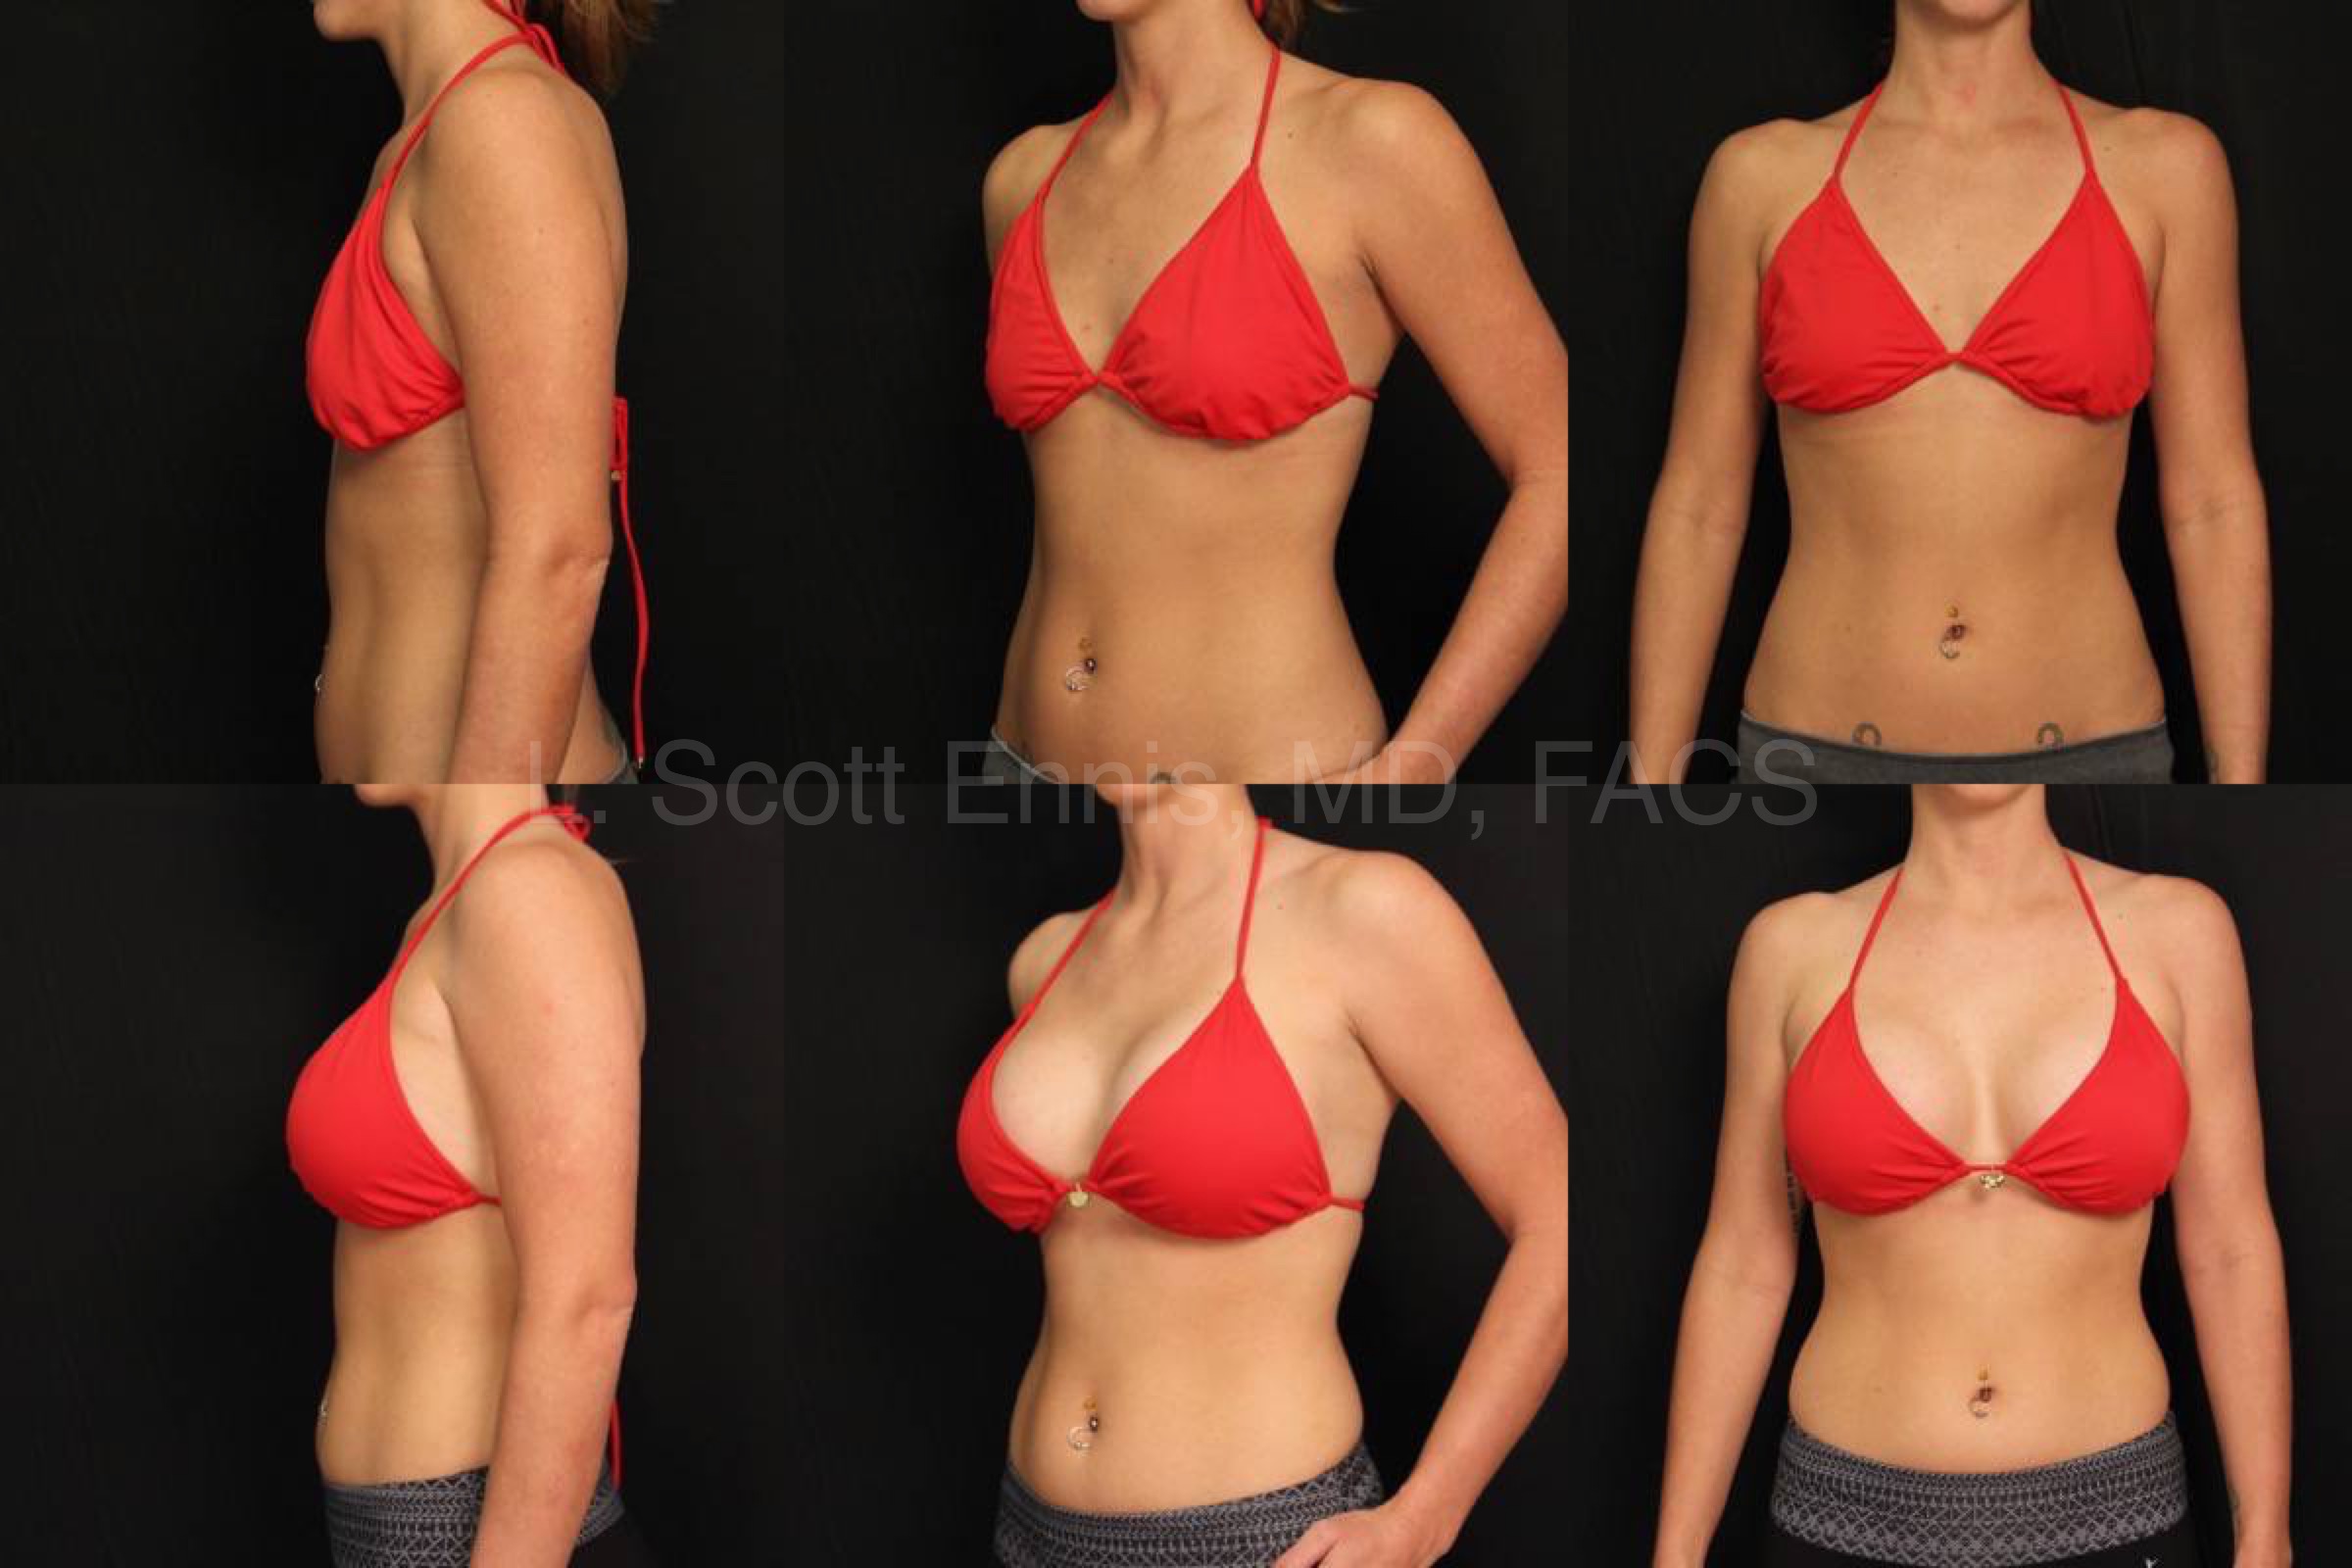 What Is the Best Bra After Breast Enhancement Surgery?